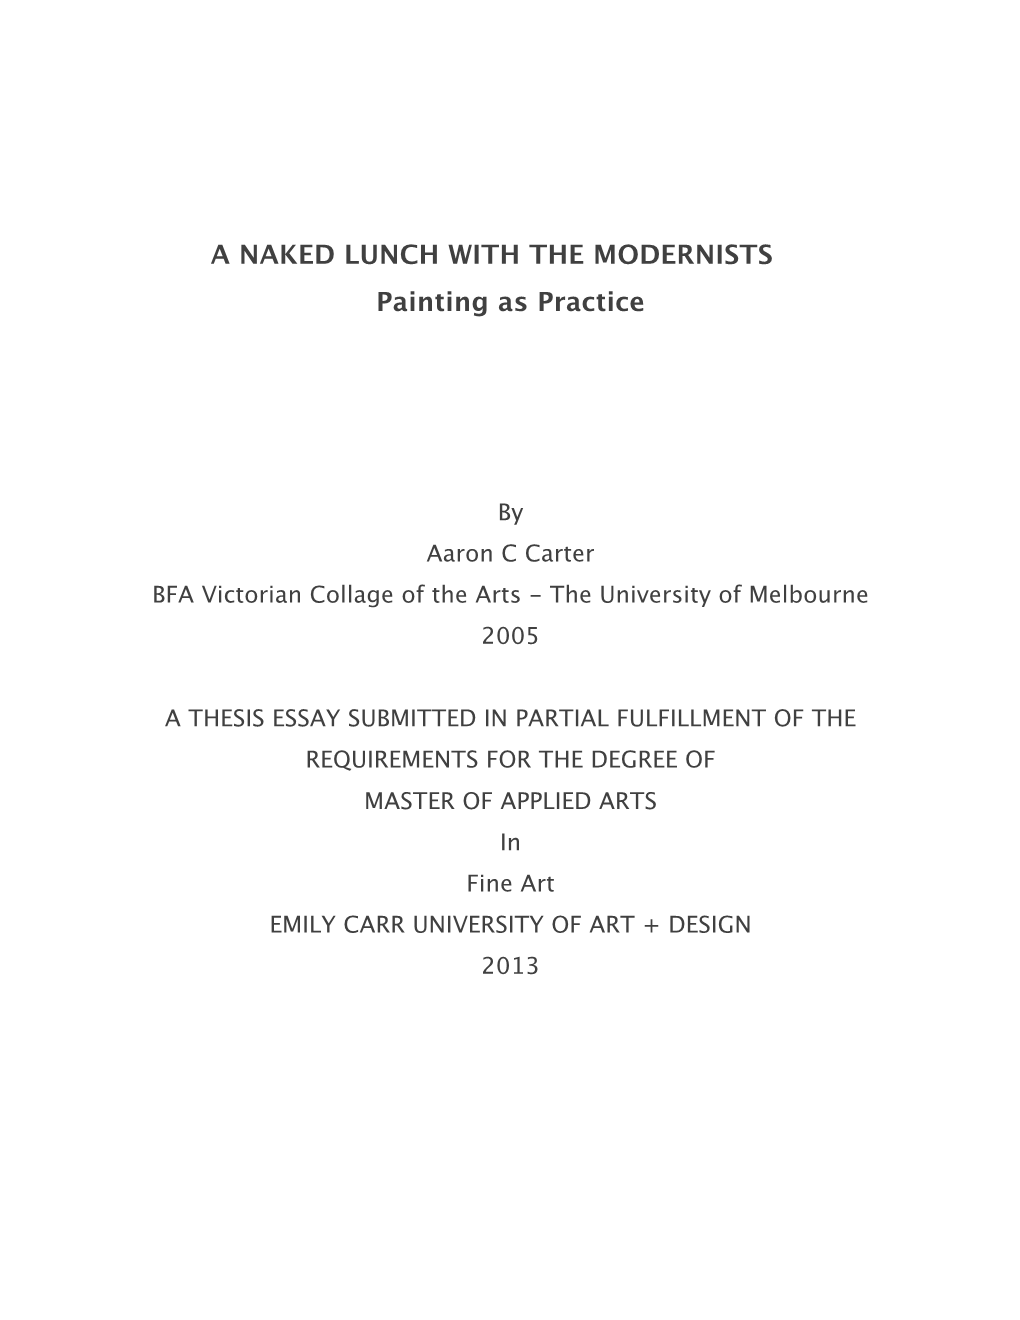 A NAKED LUNCH with the MODERNISTS Painting As Practice